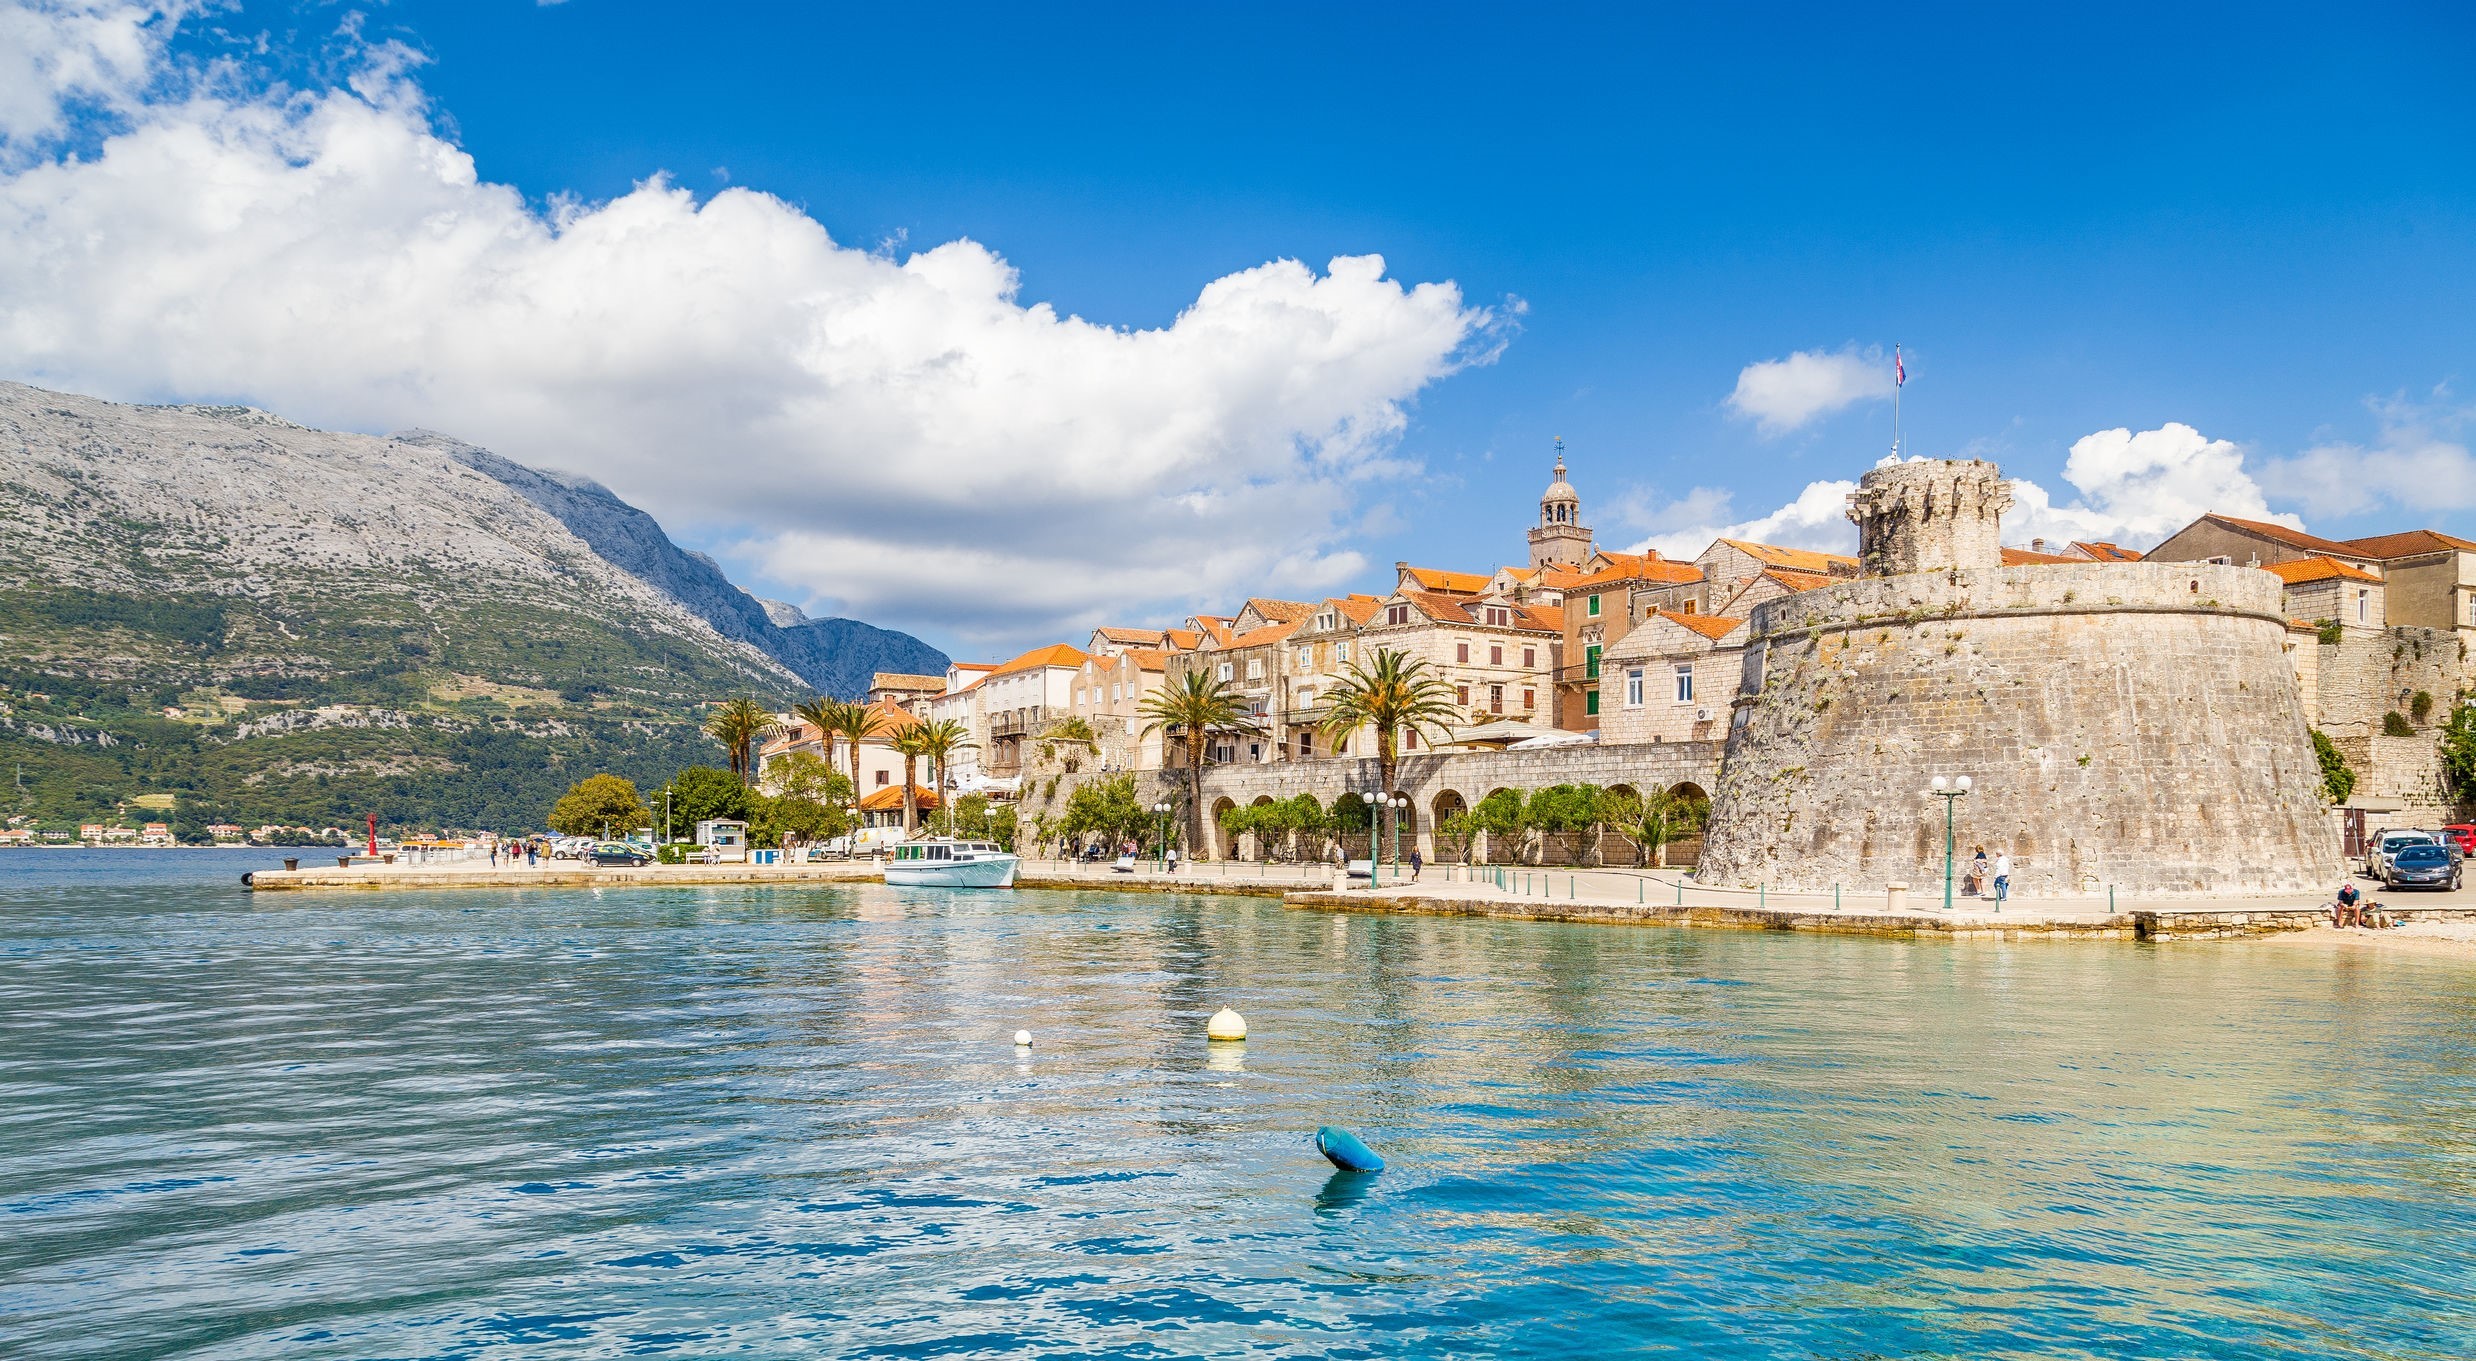 Croatia is the 8th mostvisited country in Europe